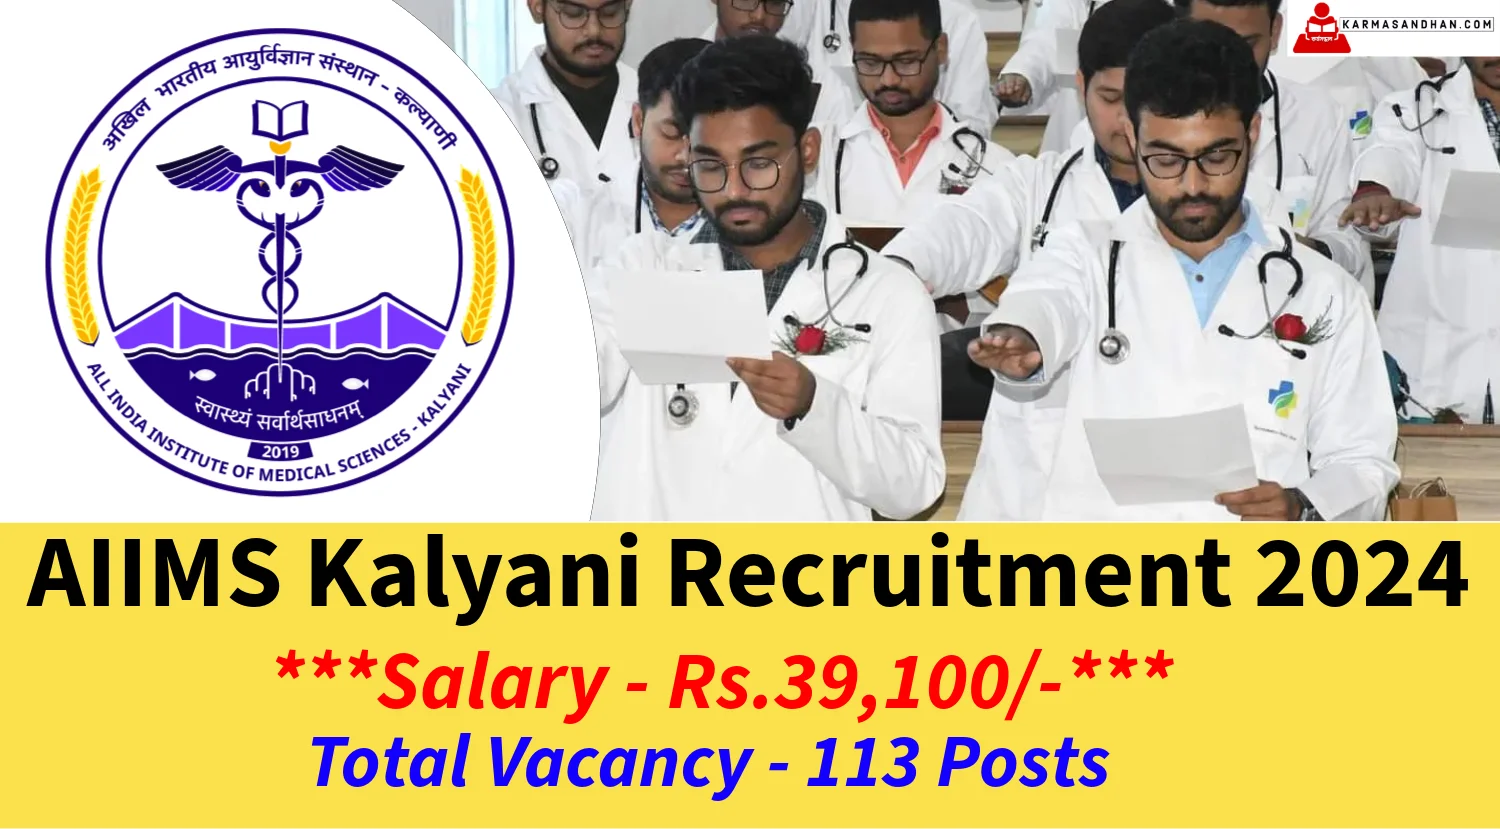 AIIMS Kalyani Recruitment 2024 Notification out for 113 Posts